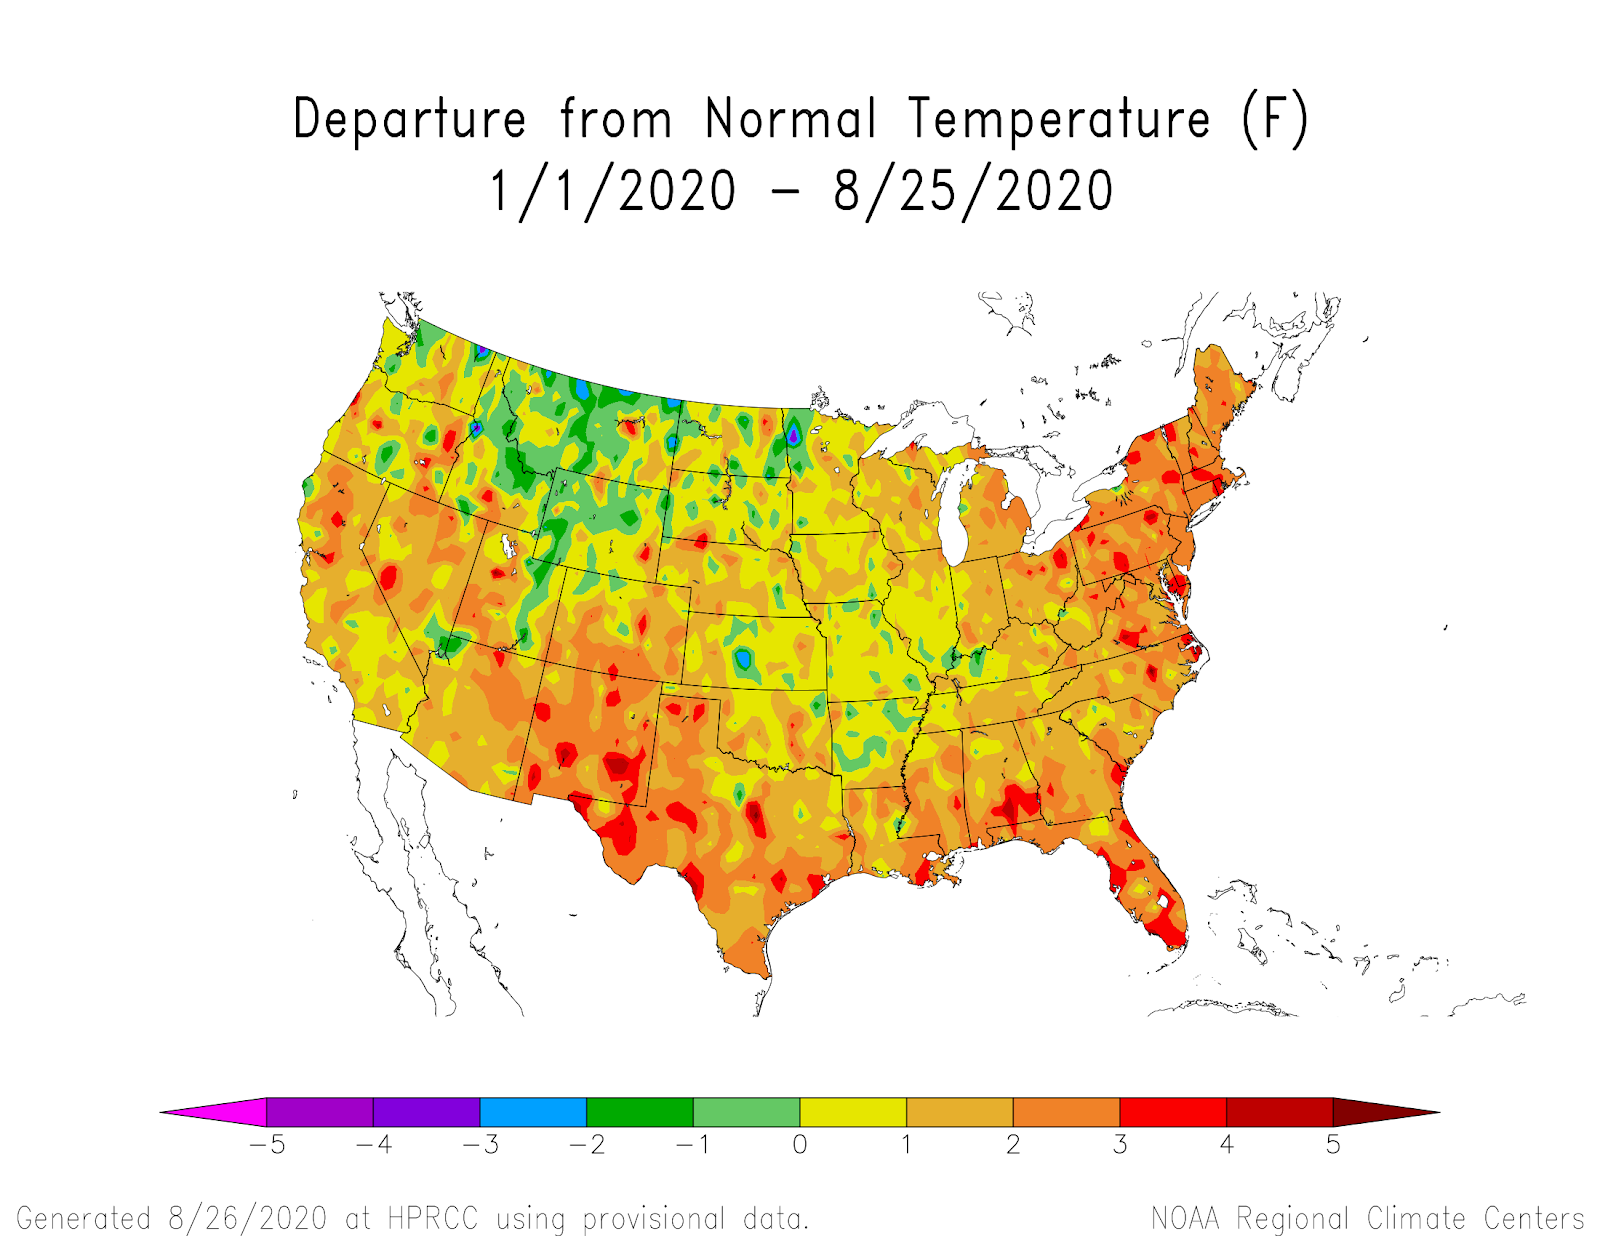 High Plains Regional Climate Center map showing year-to-date departure from normal temperature for the contiguous U.S.